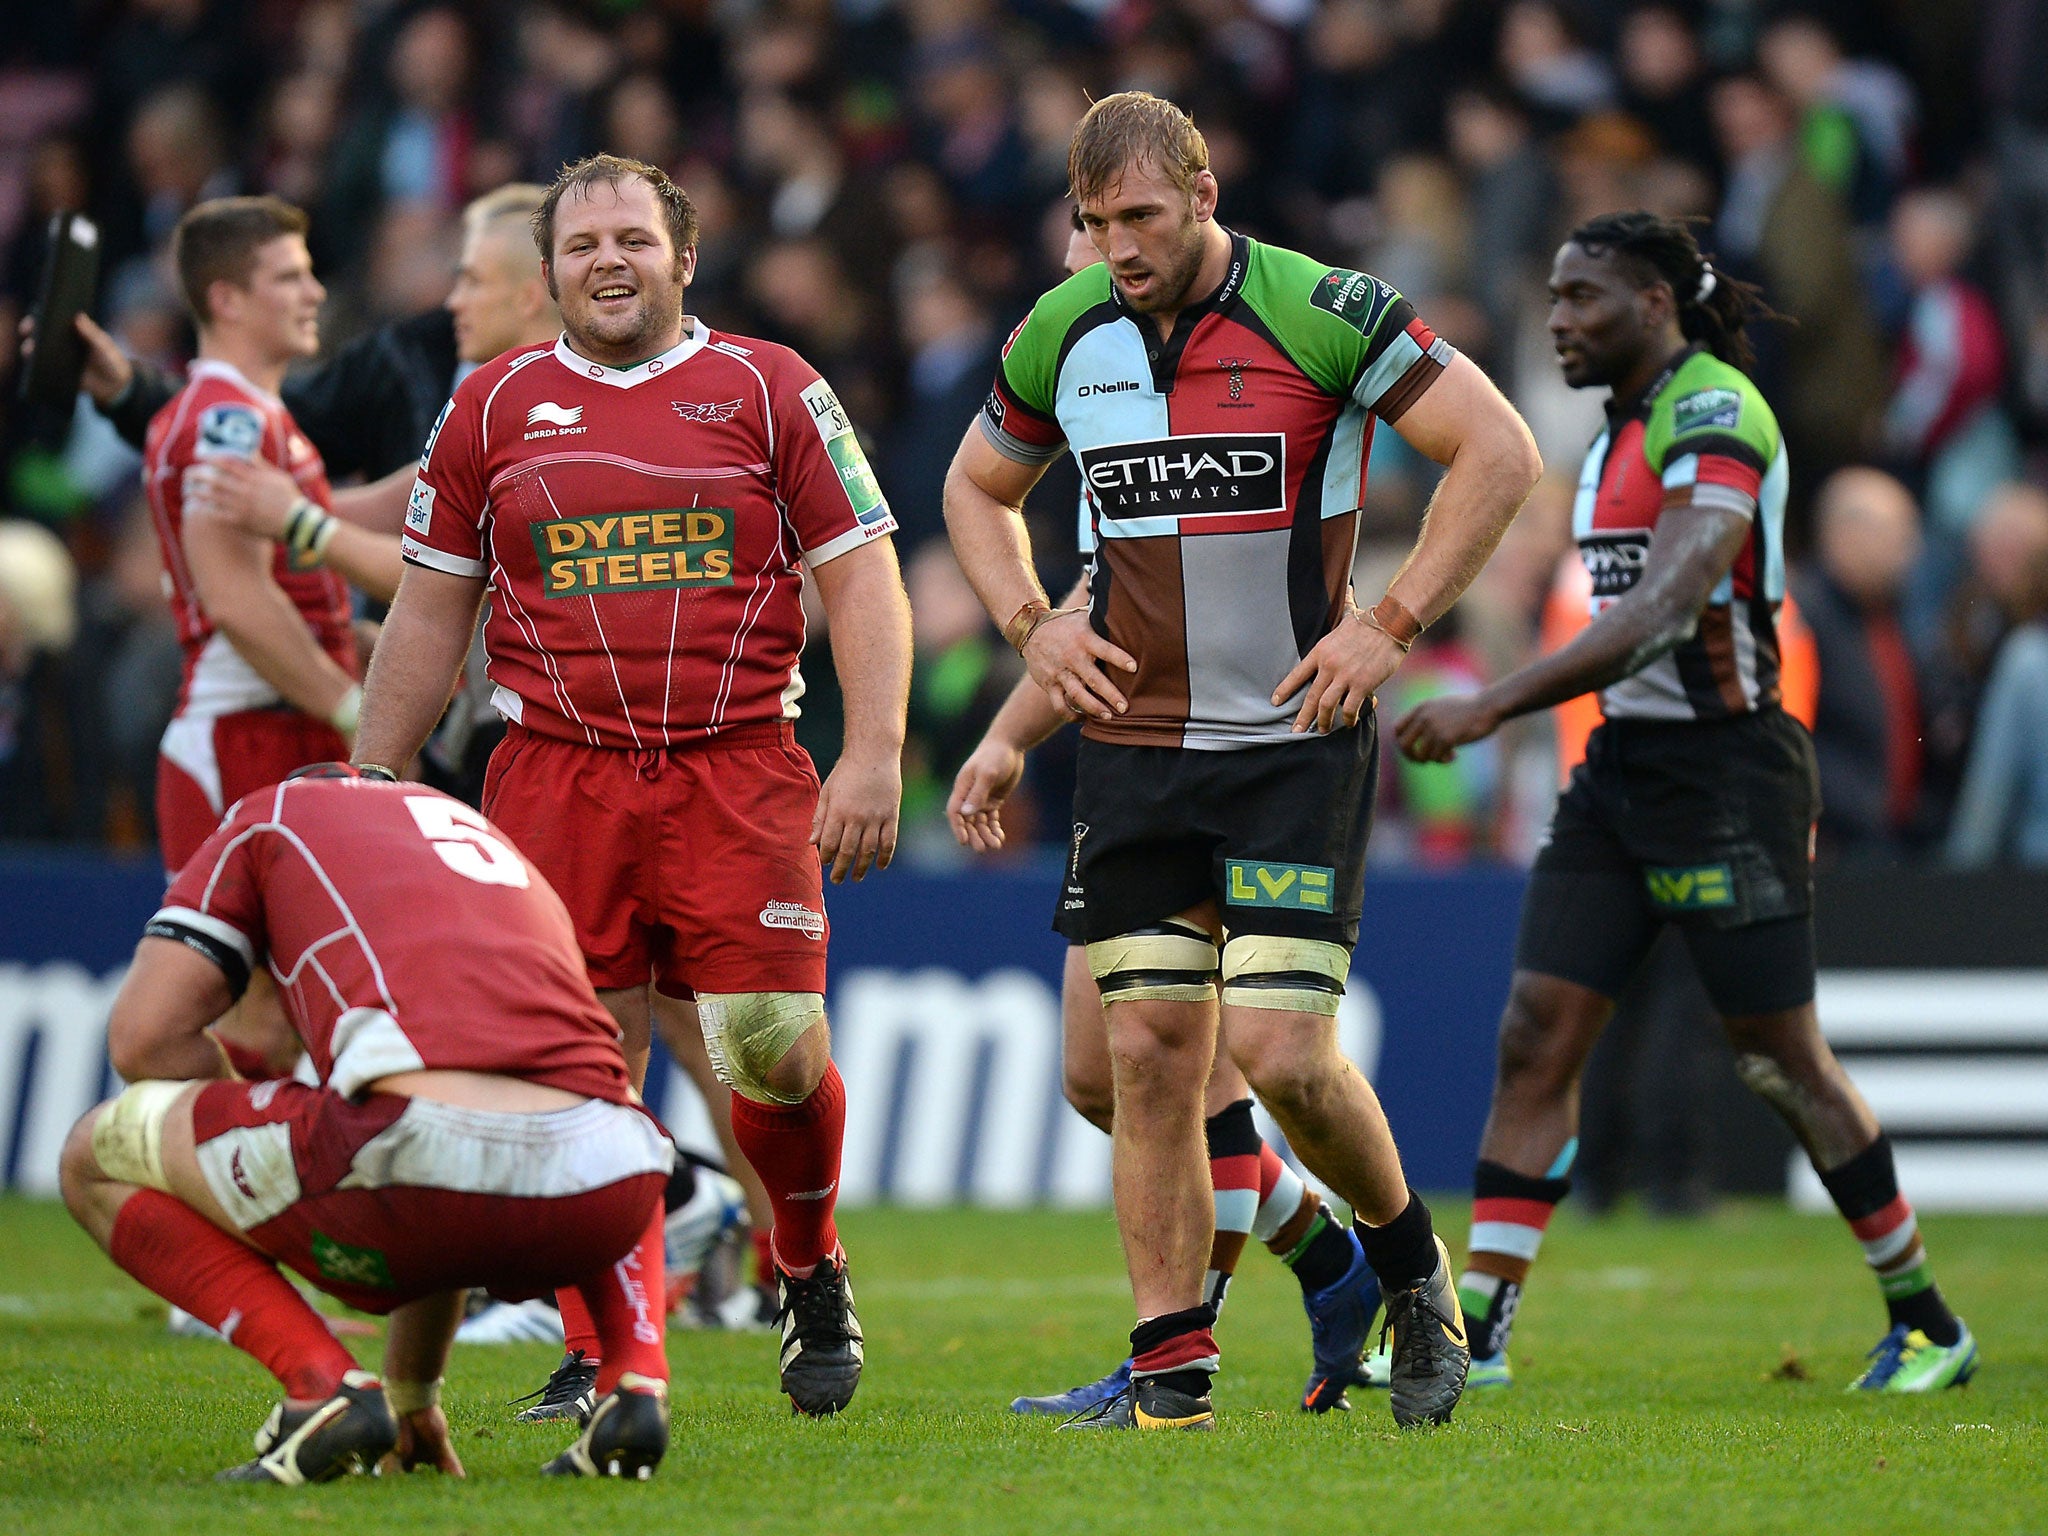 Harlequins' Chris Robshaw (second right) looks dejected after losing to Scarlets